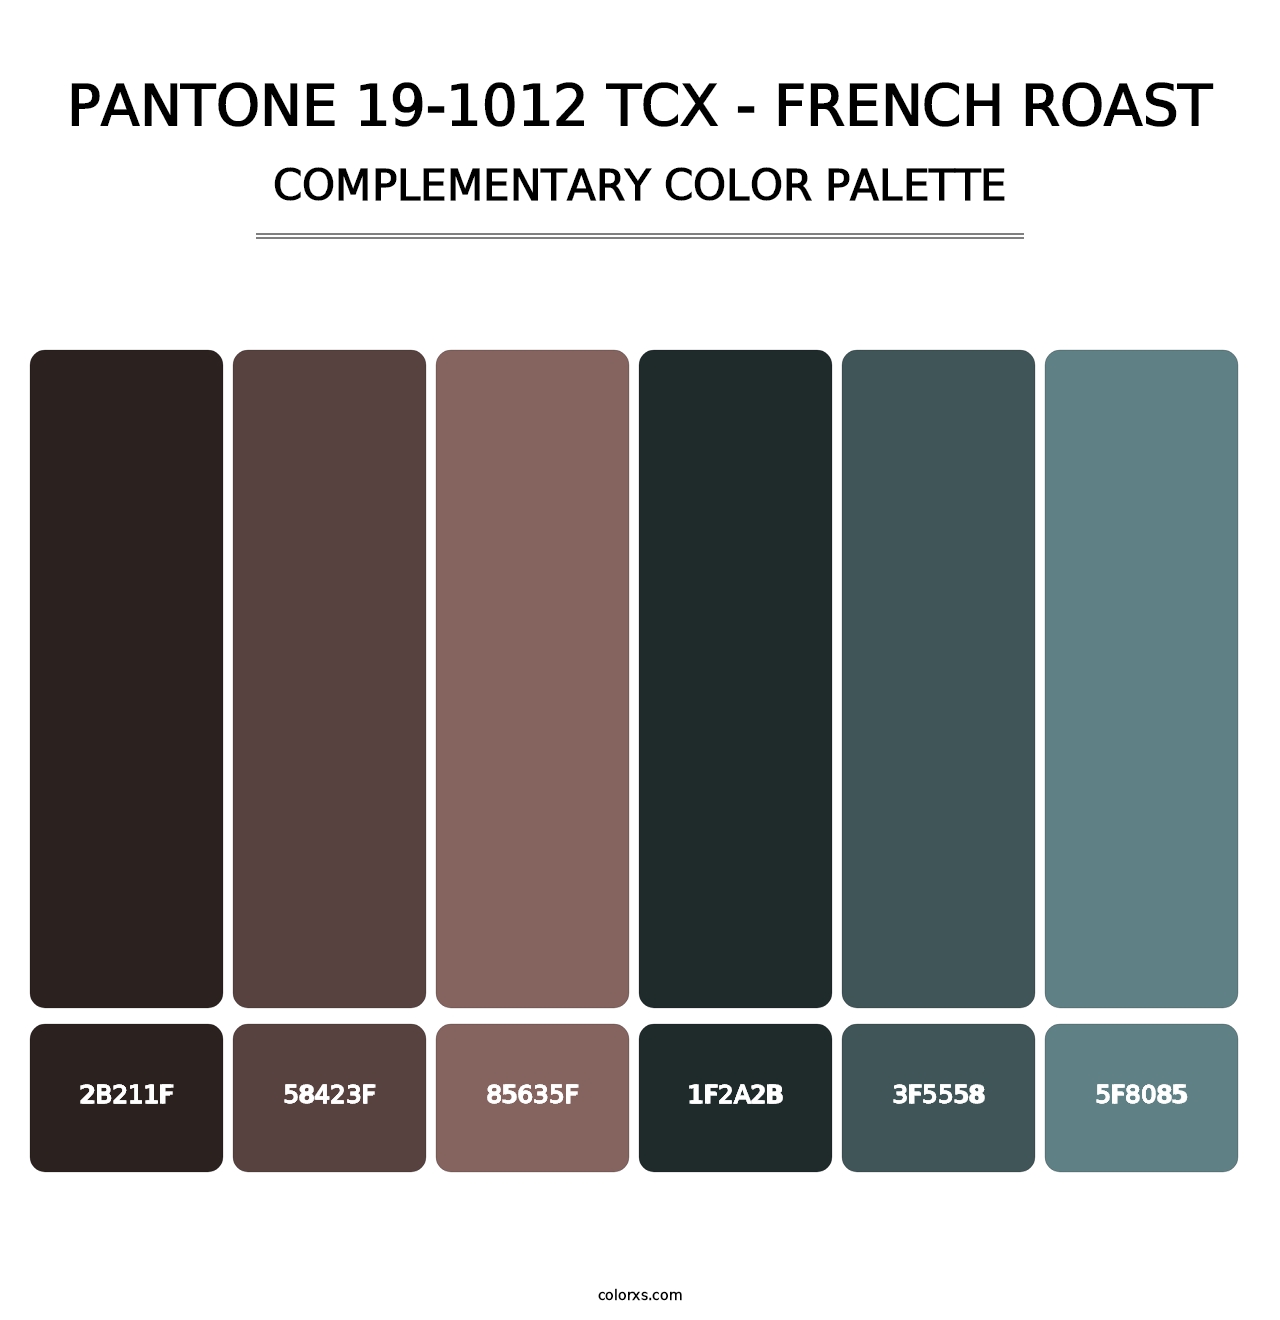 PANTONE 19-1012 TCX - French Roast - Complementary Color Palette